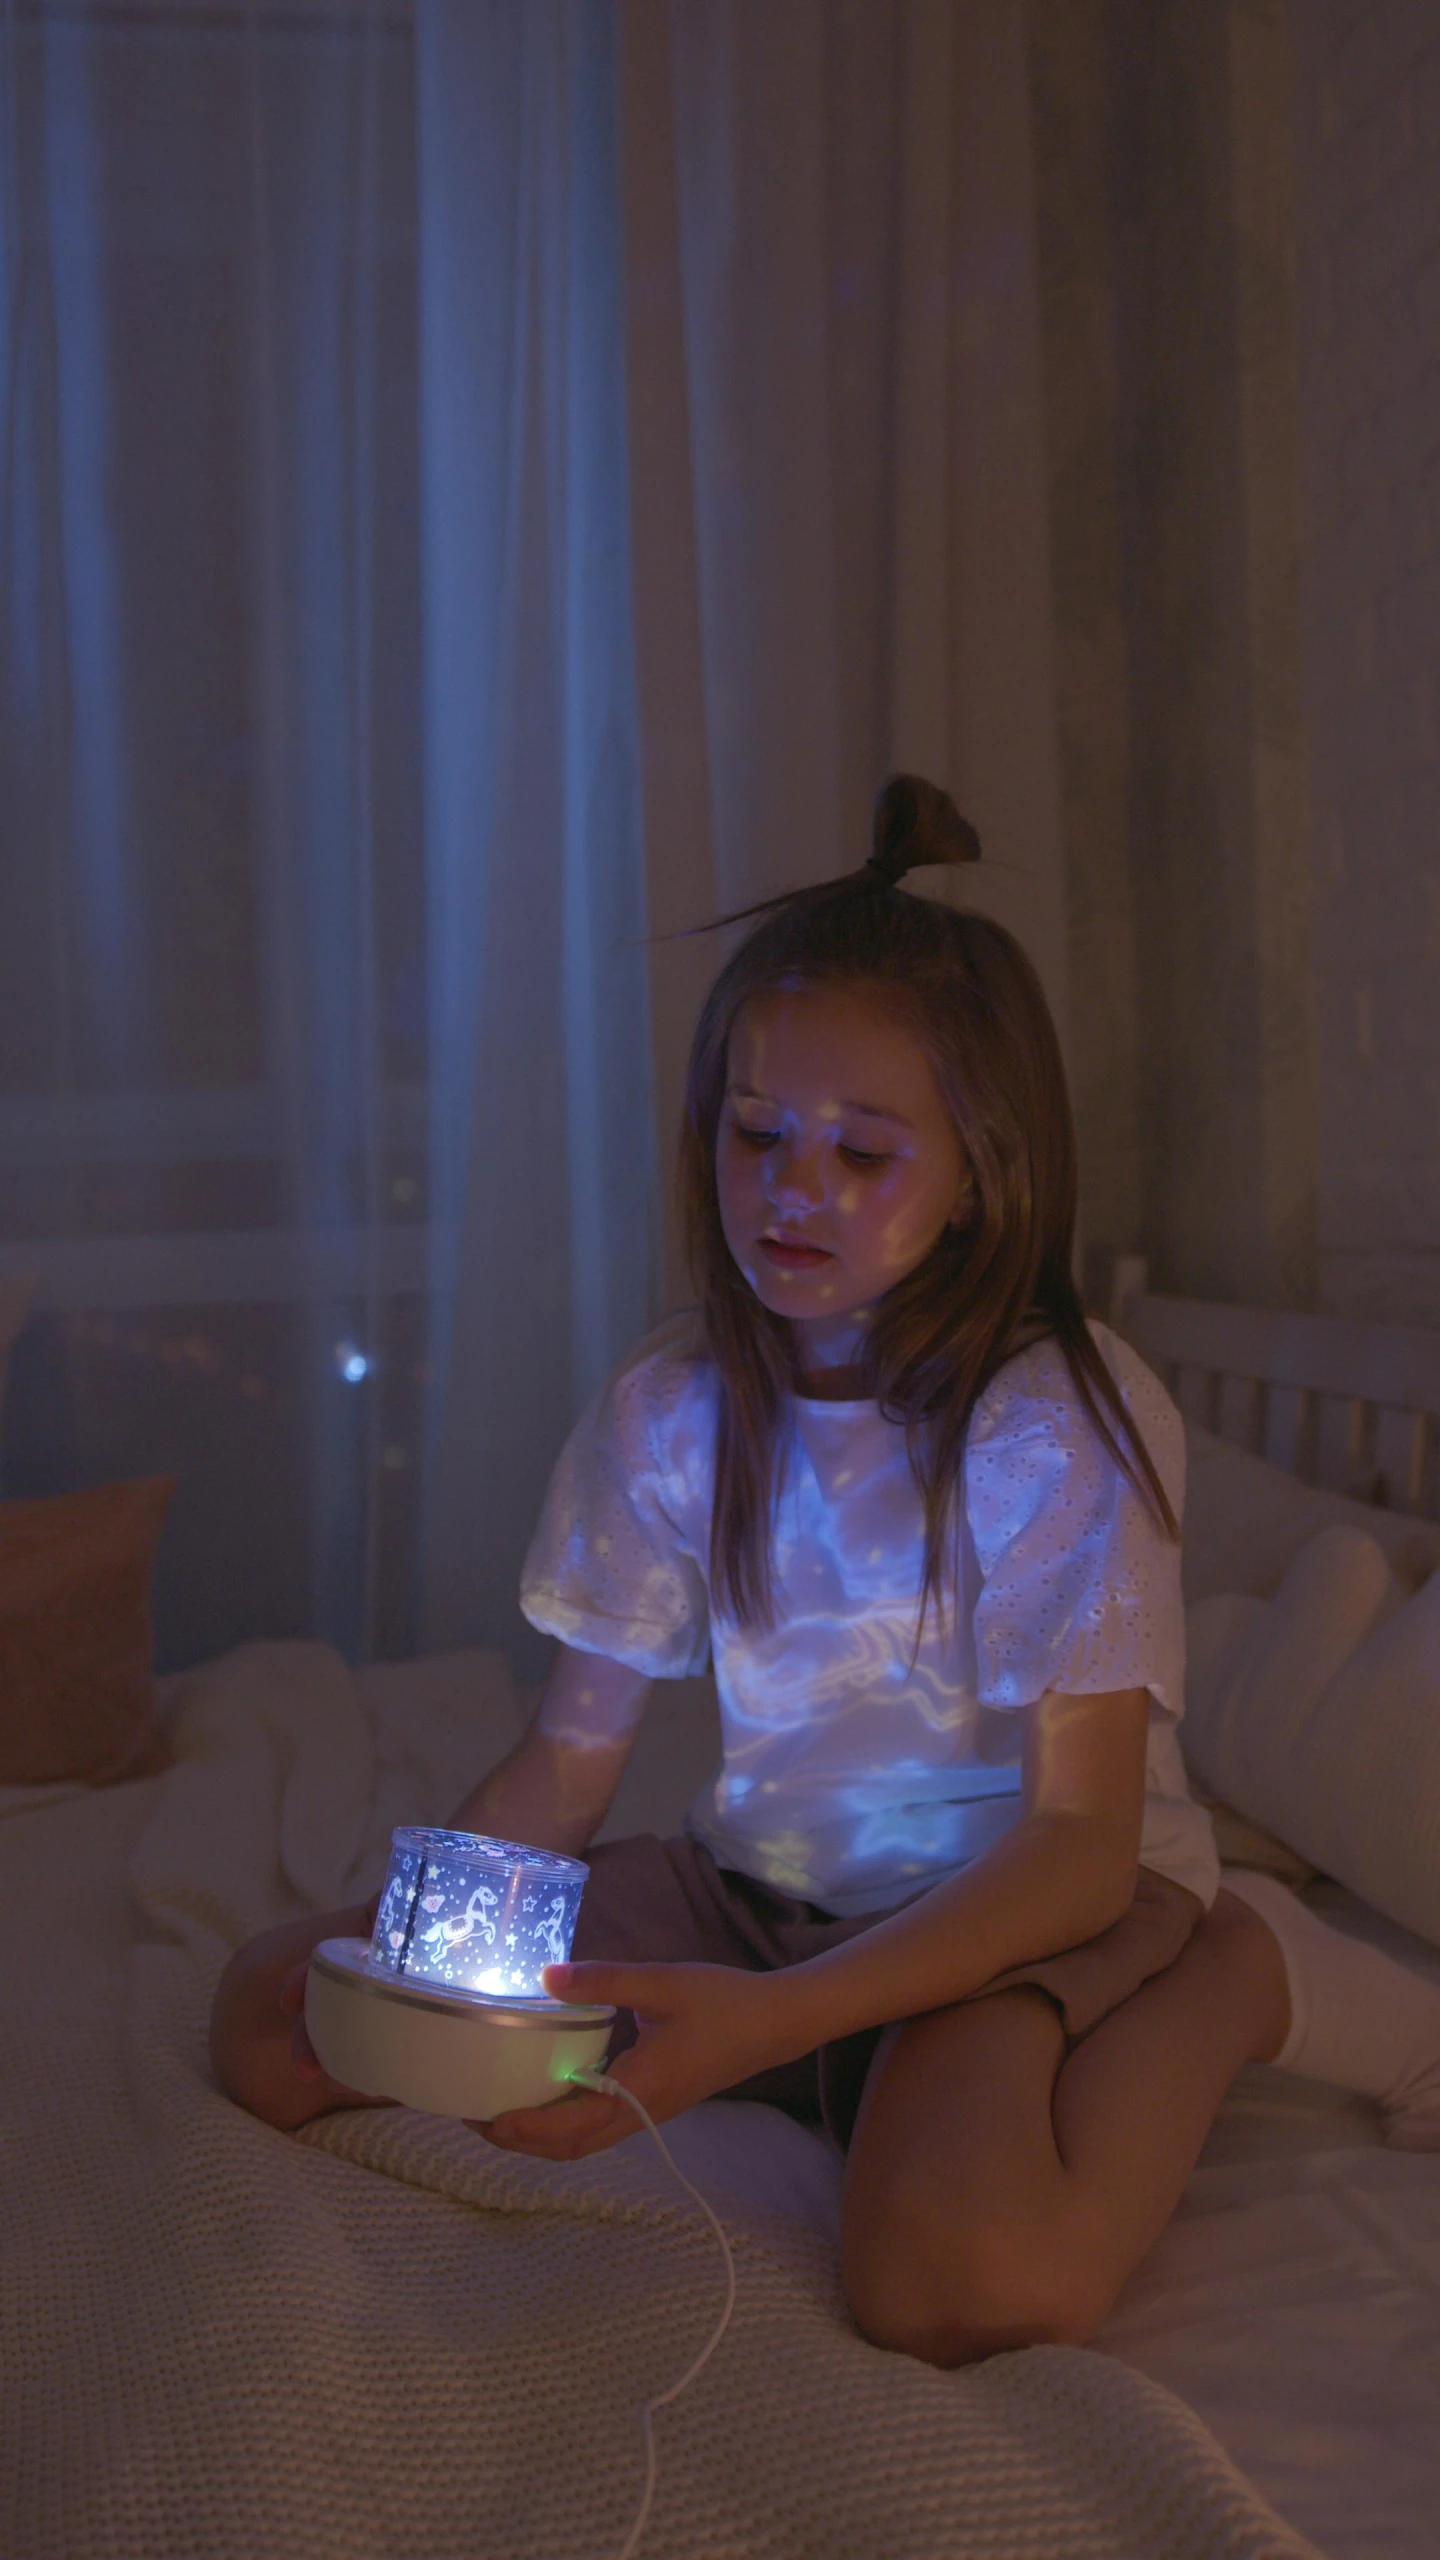 a little girl that is sitting on a bed, a hologram, pexels, lit. 'the cube', holding a candle holder, low quality photo, square